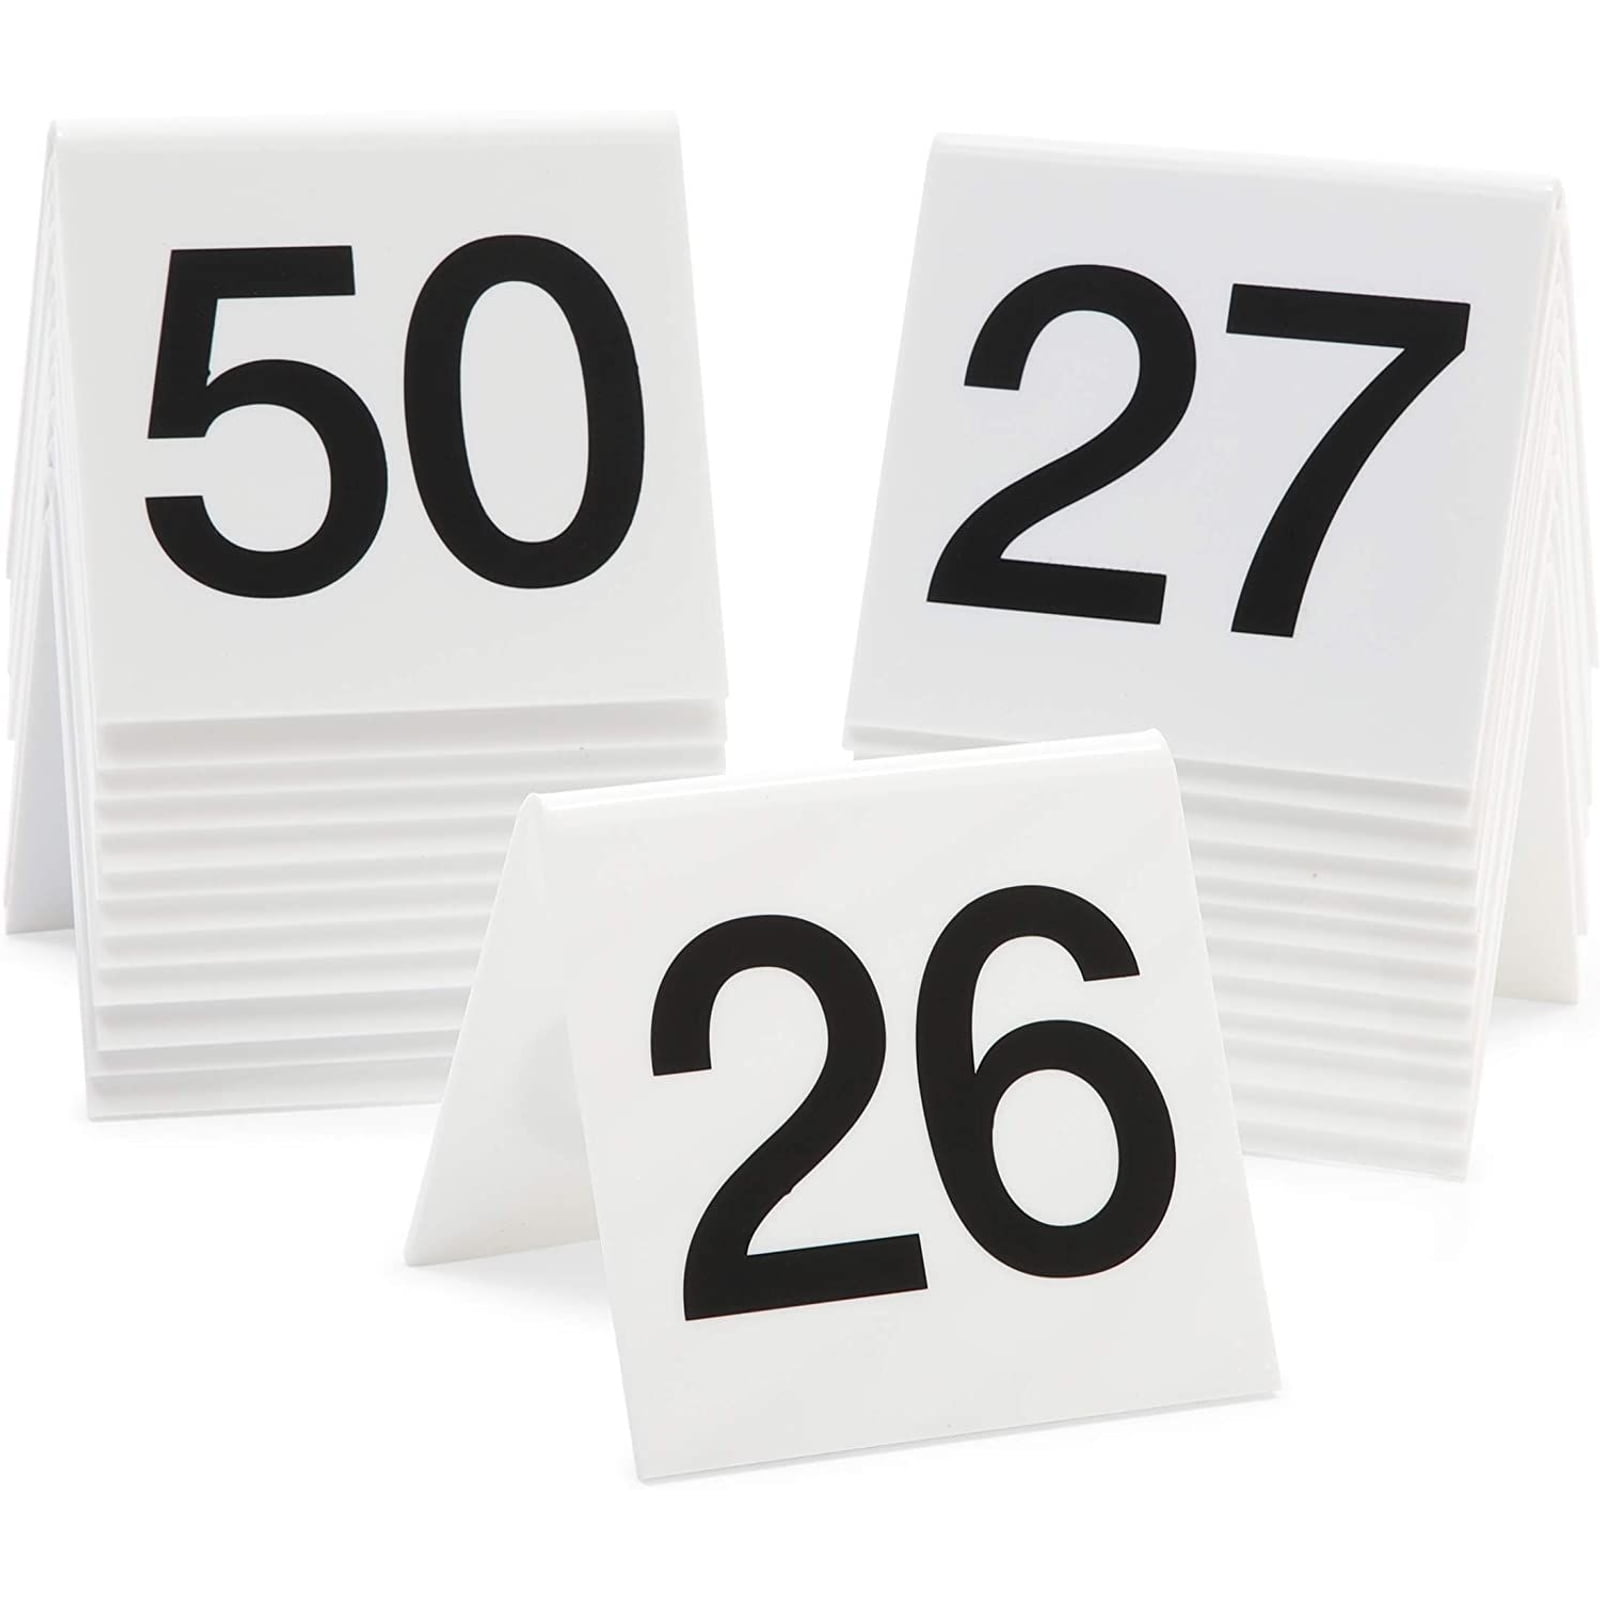 Free shipping Plastic Table Numbers 1-20 White w/Black number Tent Style 